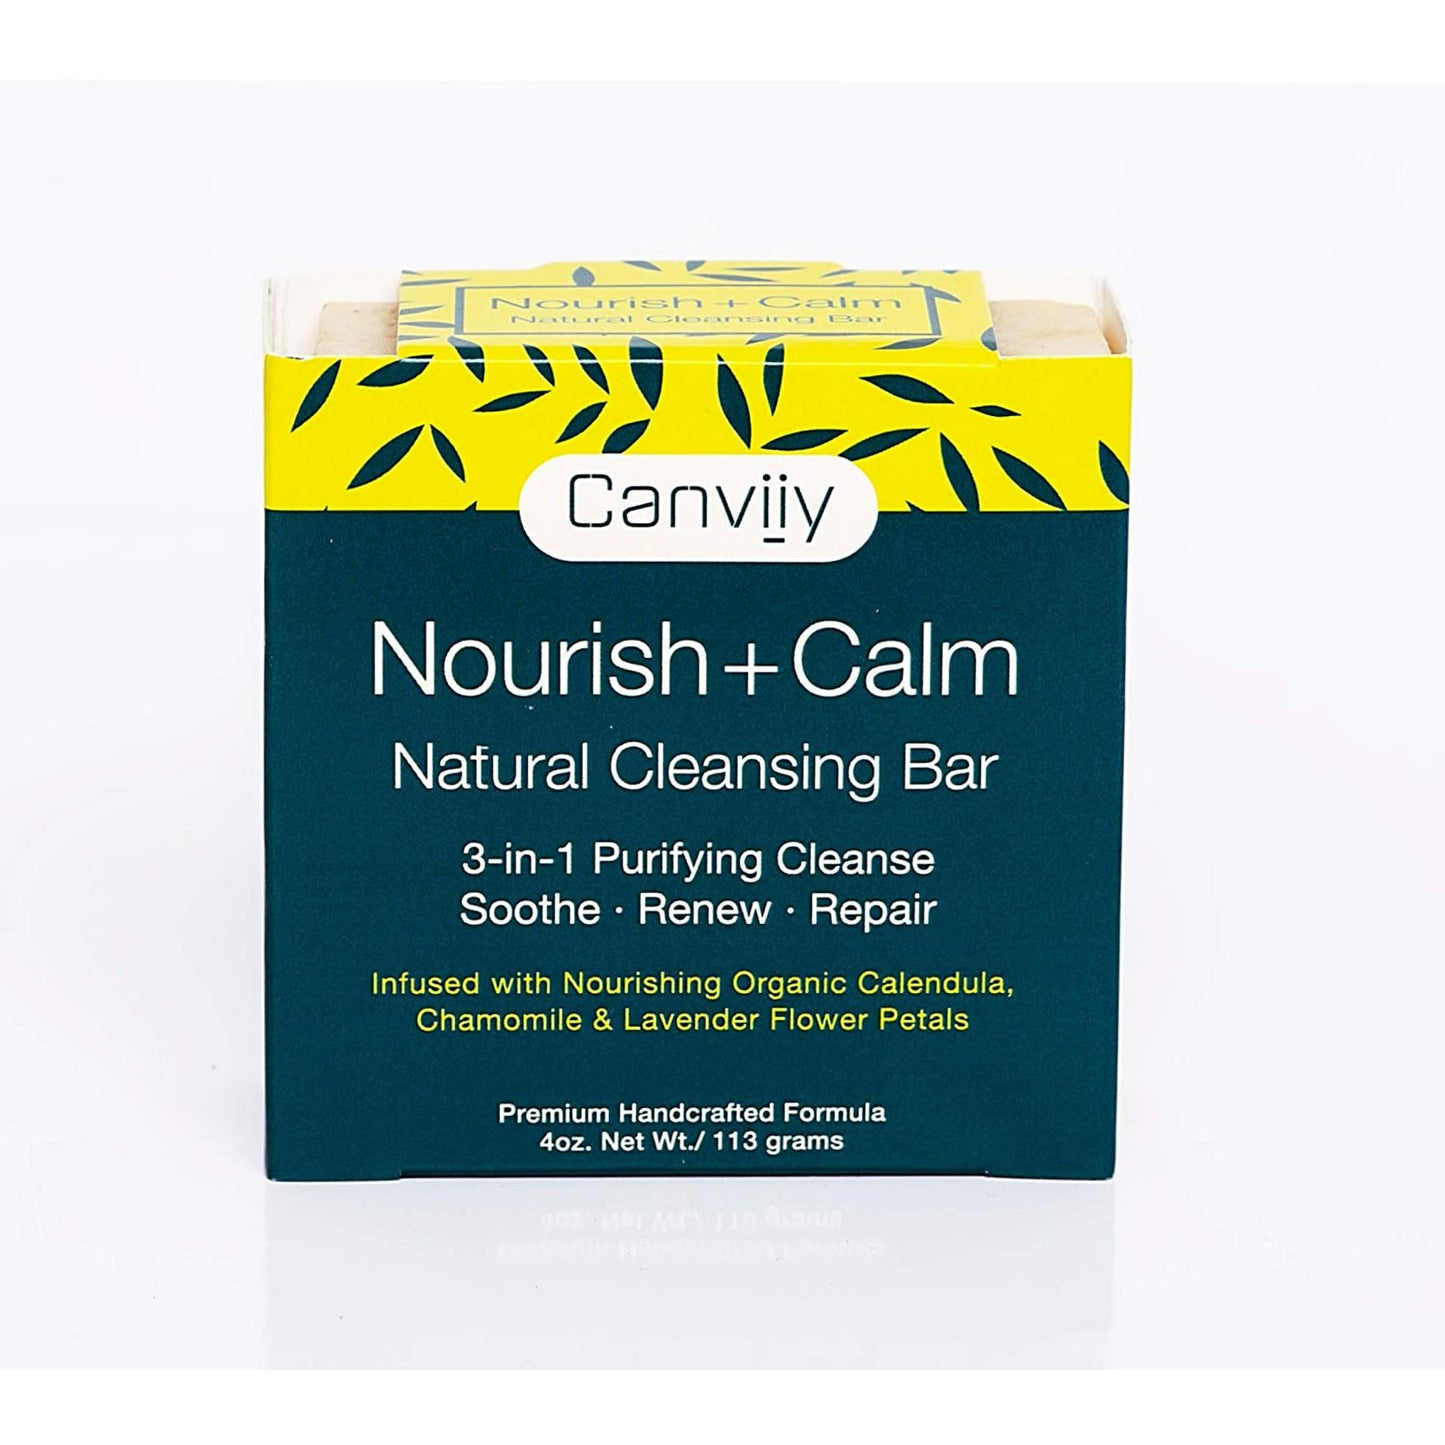 Canviiy ScalpBliss Nourish + Calm Natural Cleansing Bar for 3- in-1 Purifying Cleanse, 4 oz.